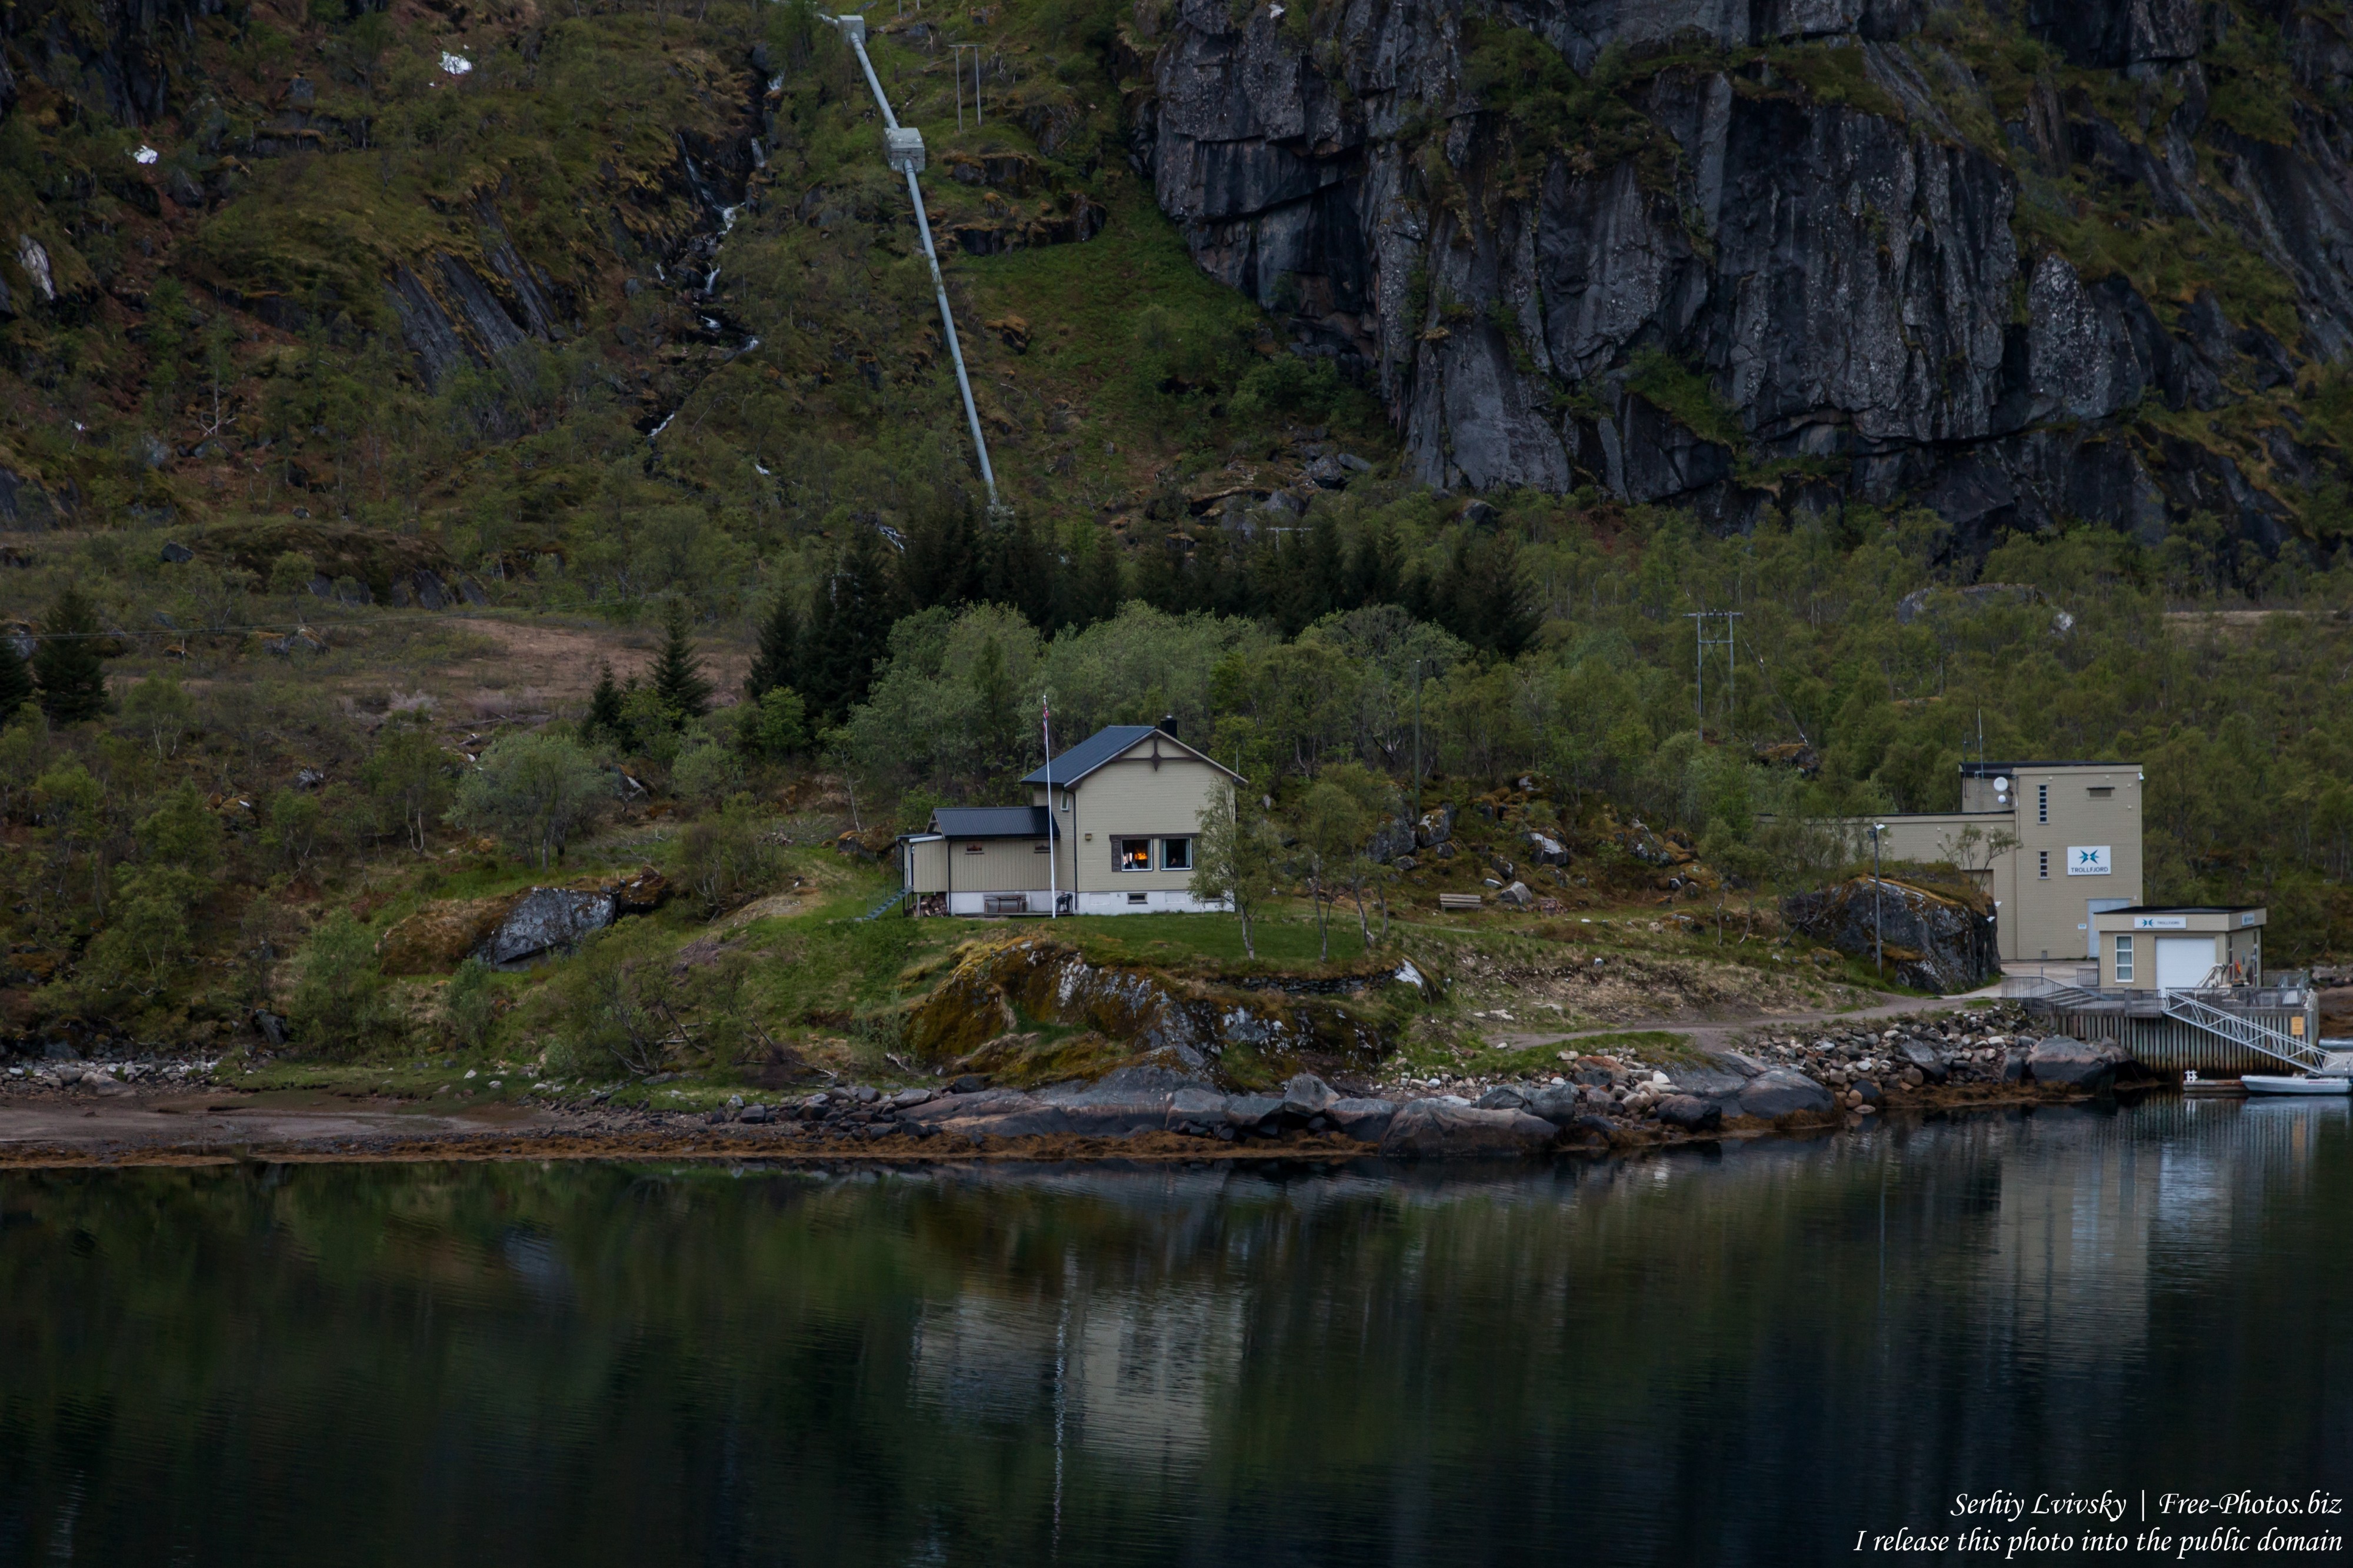 Trollfjord, Norway, photographed in June 2018 by Serhiy Lvivsky, picture 11